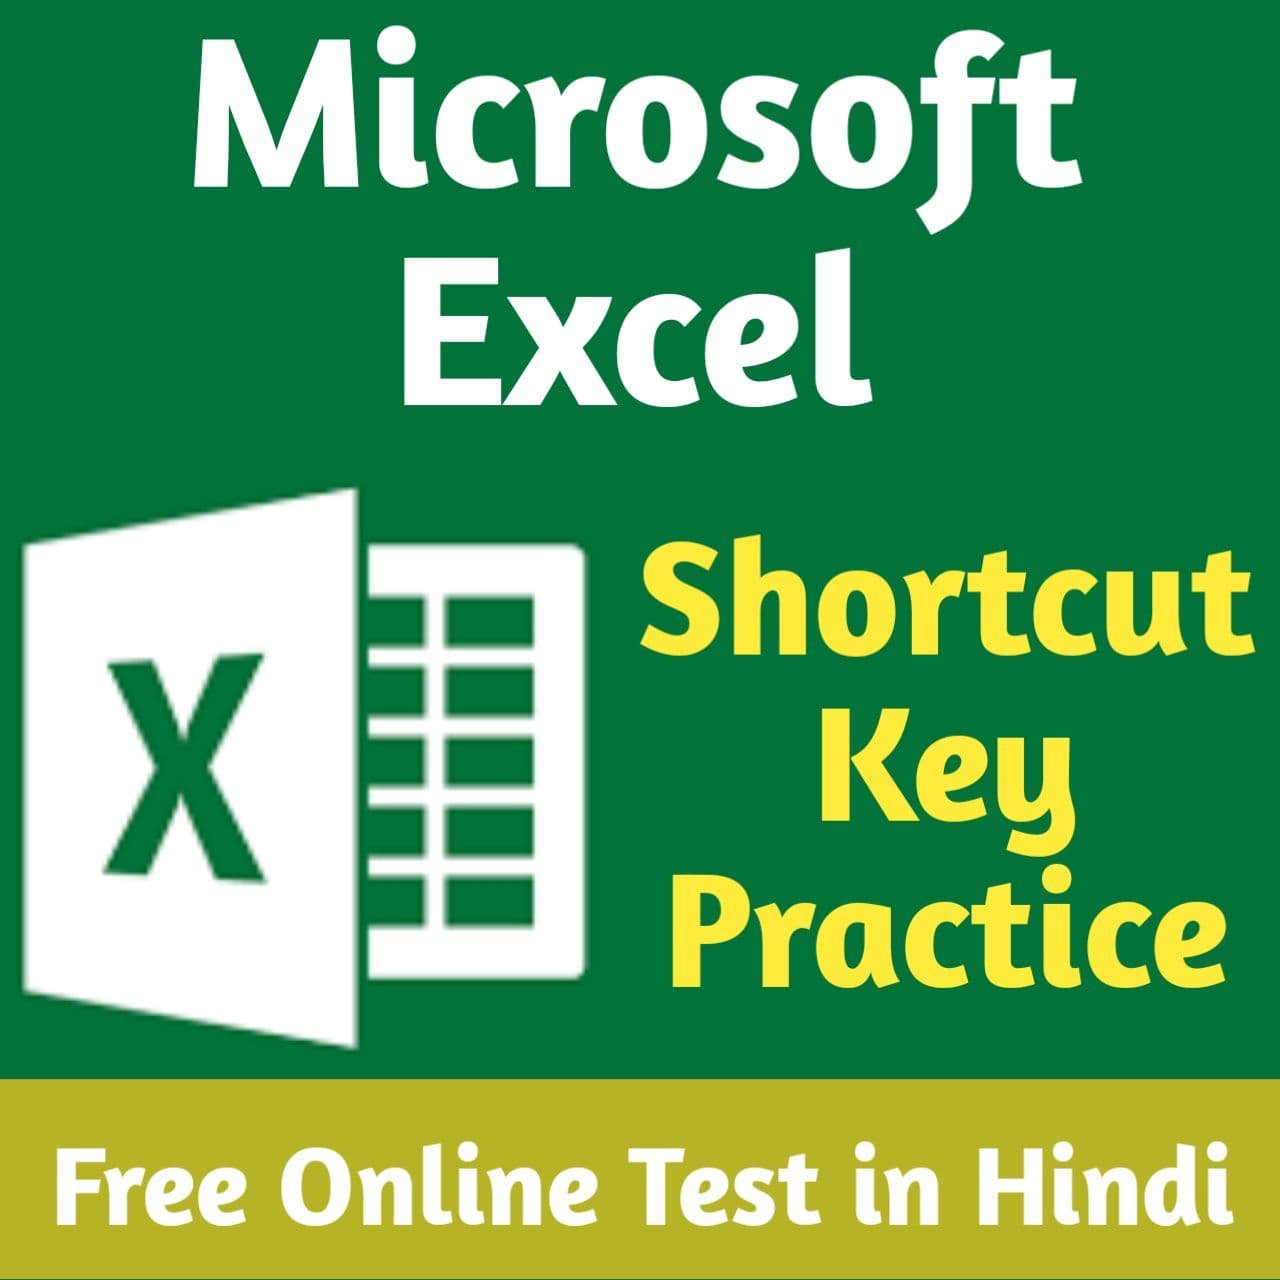 MS Excel – Shortcut Key Online Practice Test in Hindi | Learn More India